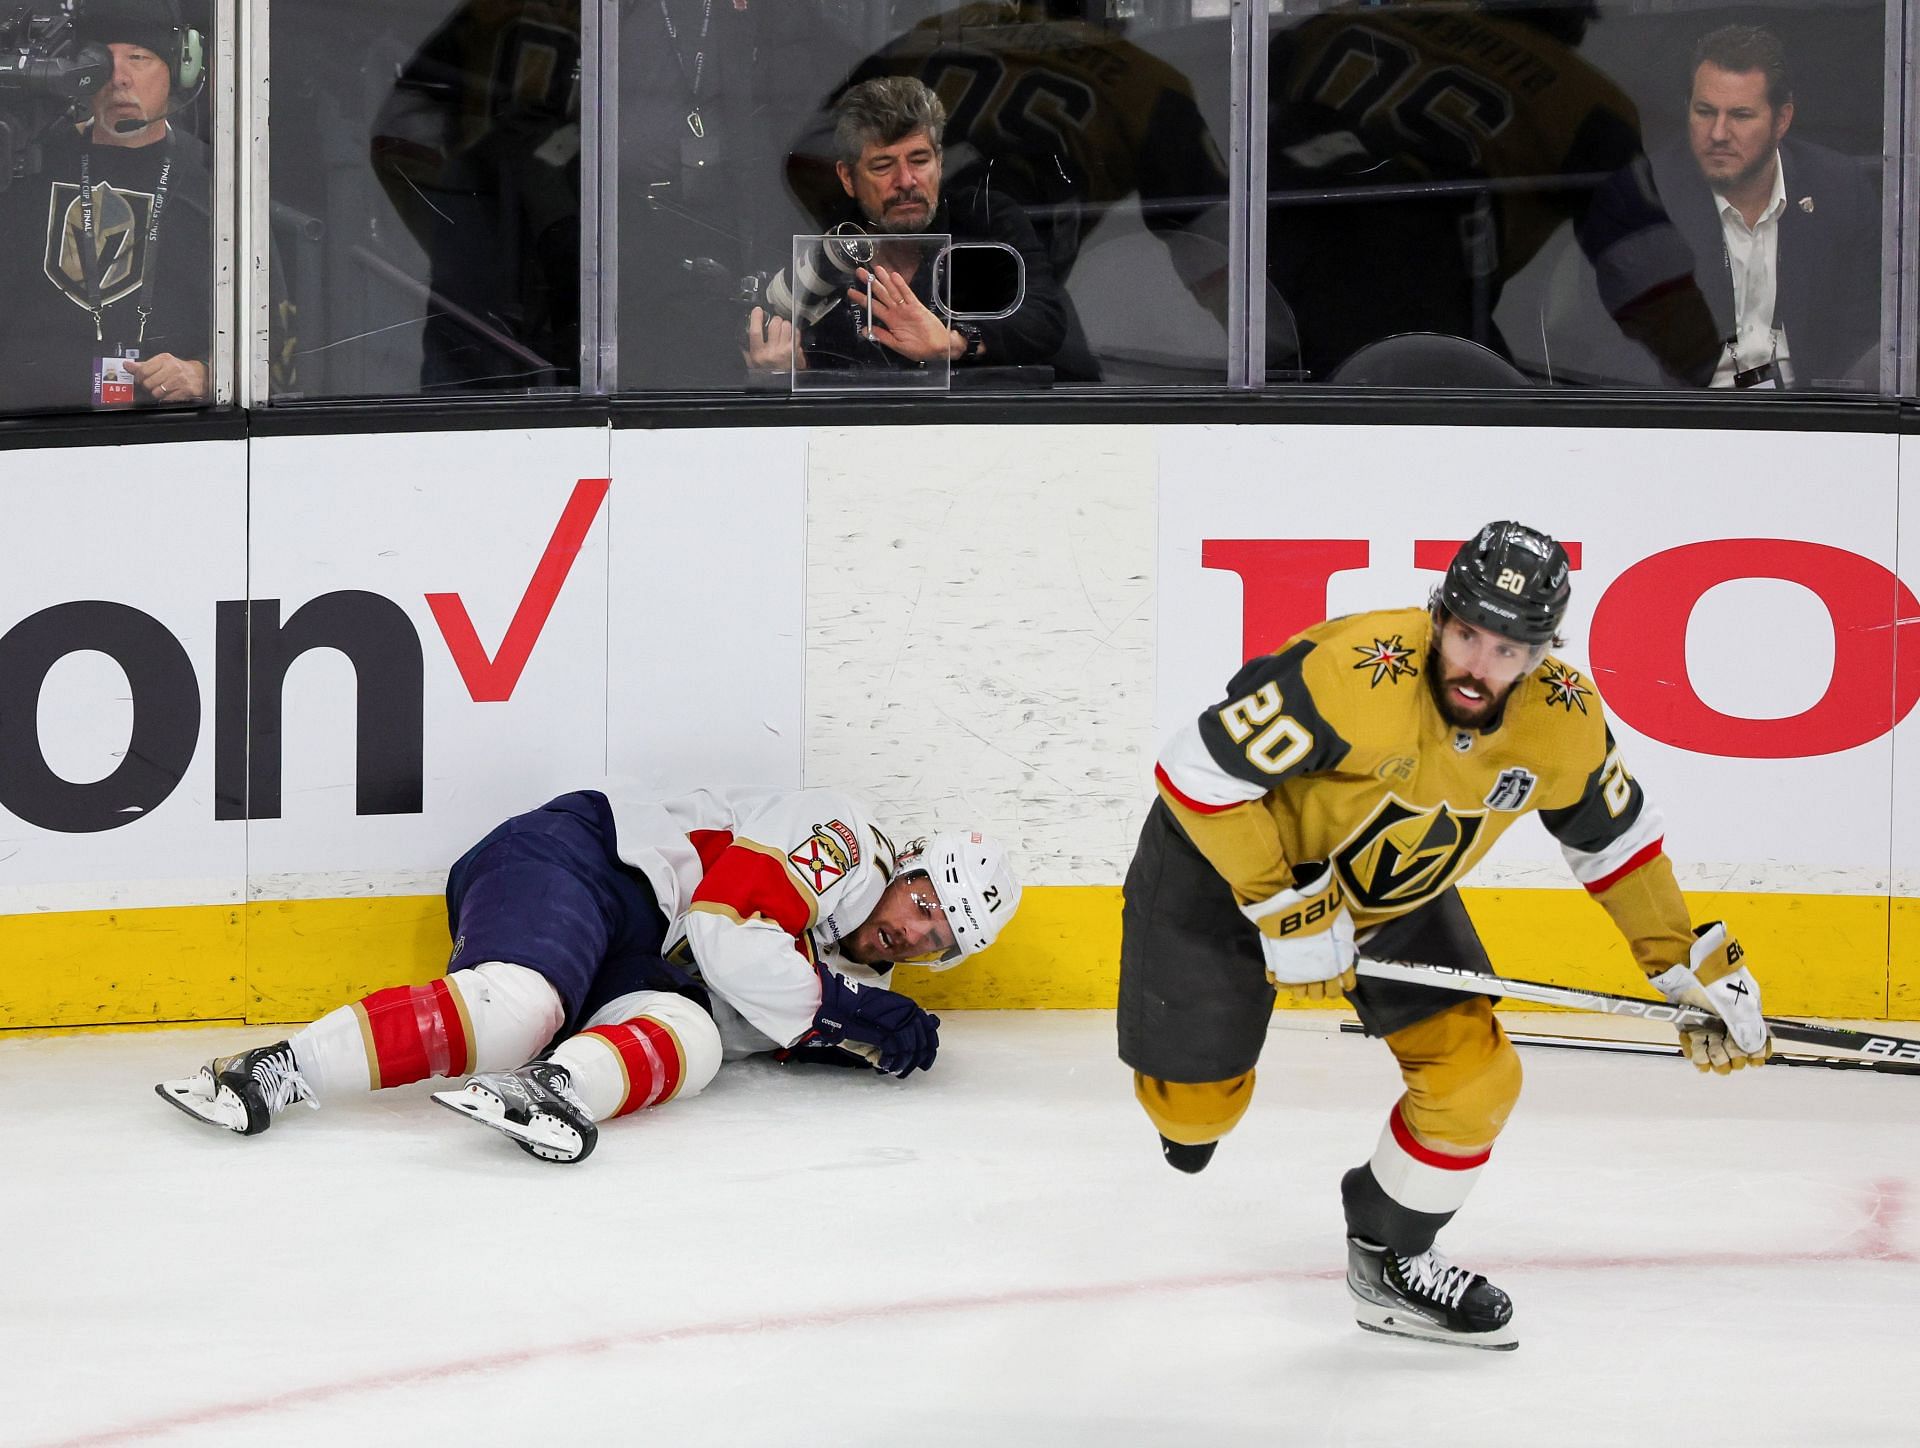 Kid Mercury blows on his trumpet prior to Game 4 NHL Stanley Cup playoff  hockey semifinal action between the Montreal Canadiens and the Vegas Golden  Knights in Montreal, Sunday, June 20, 2021. (